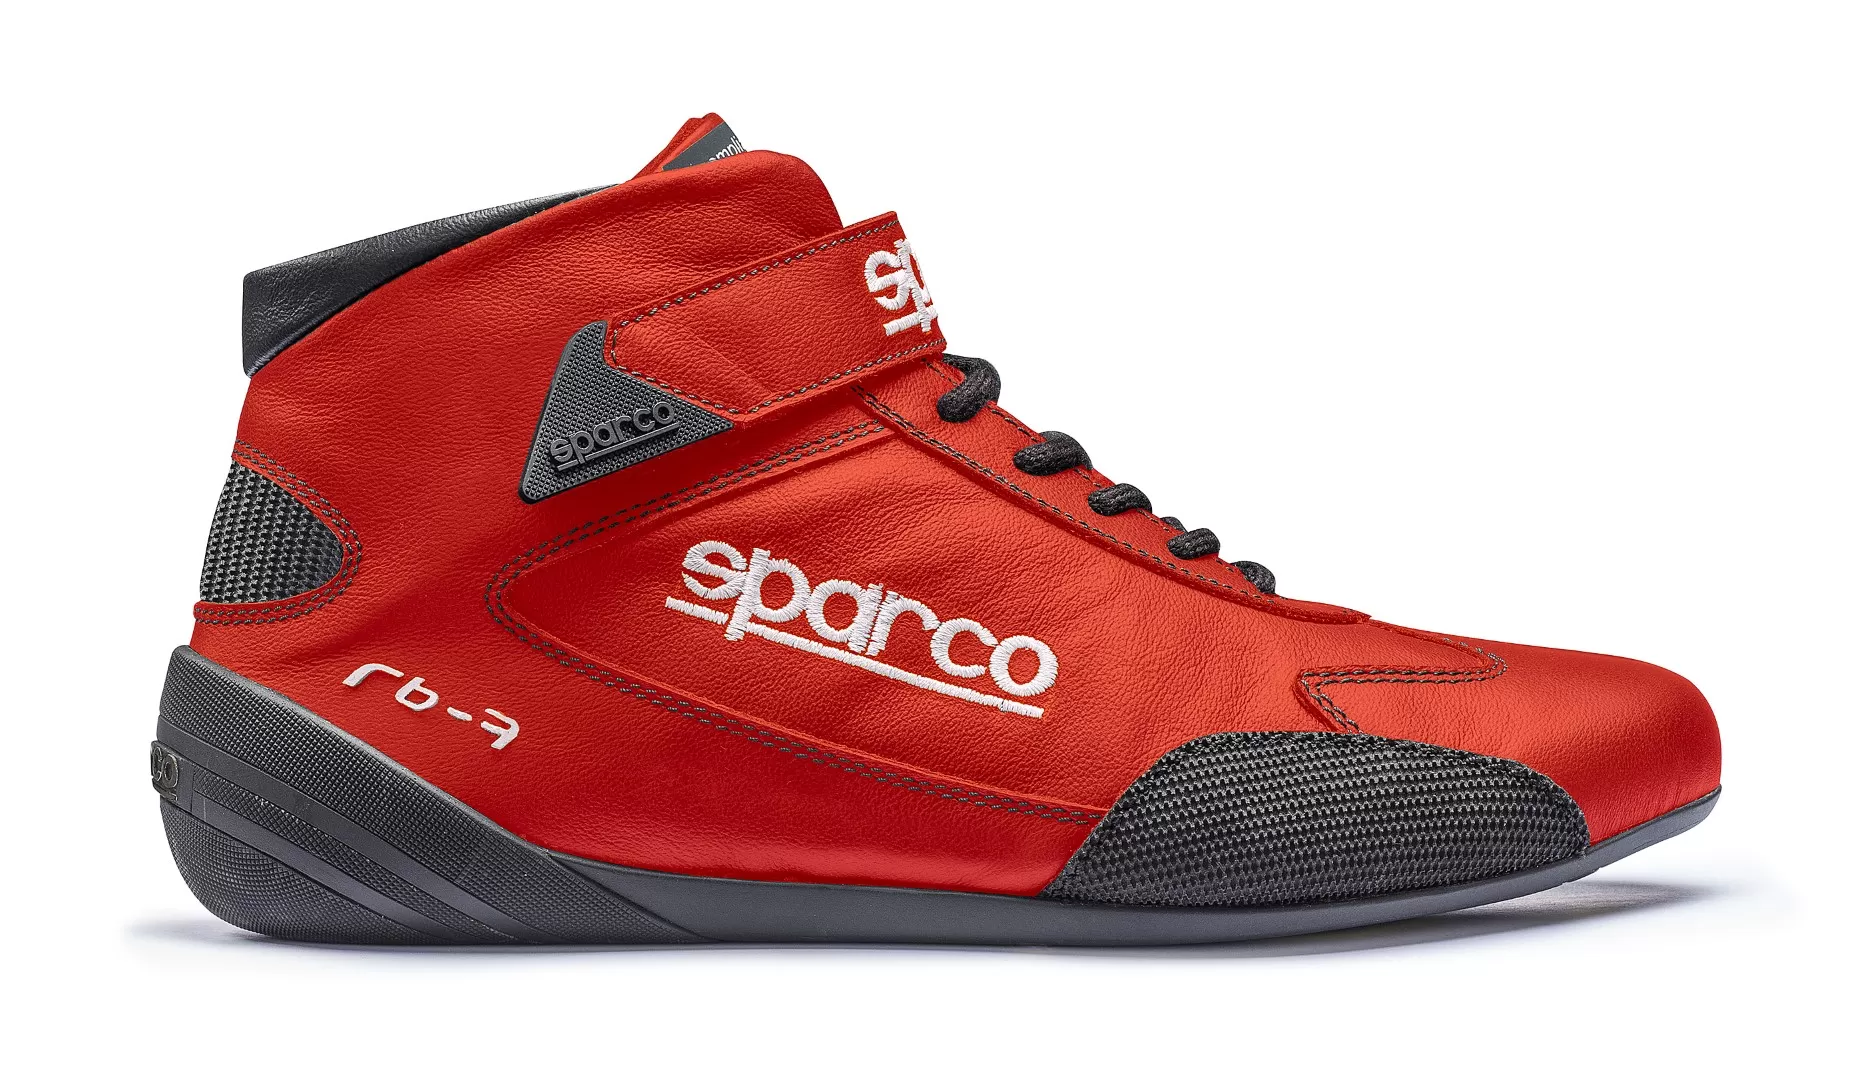 Sparco Red Cross RB-7 Driving Shoes - 00122443RS